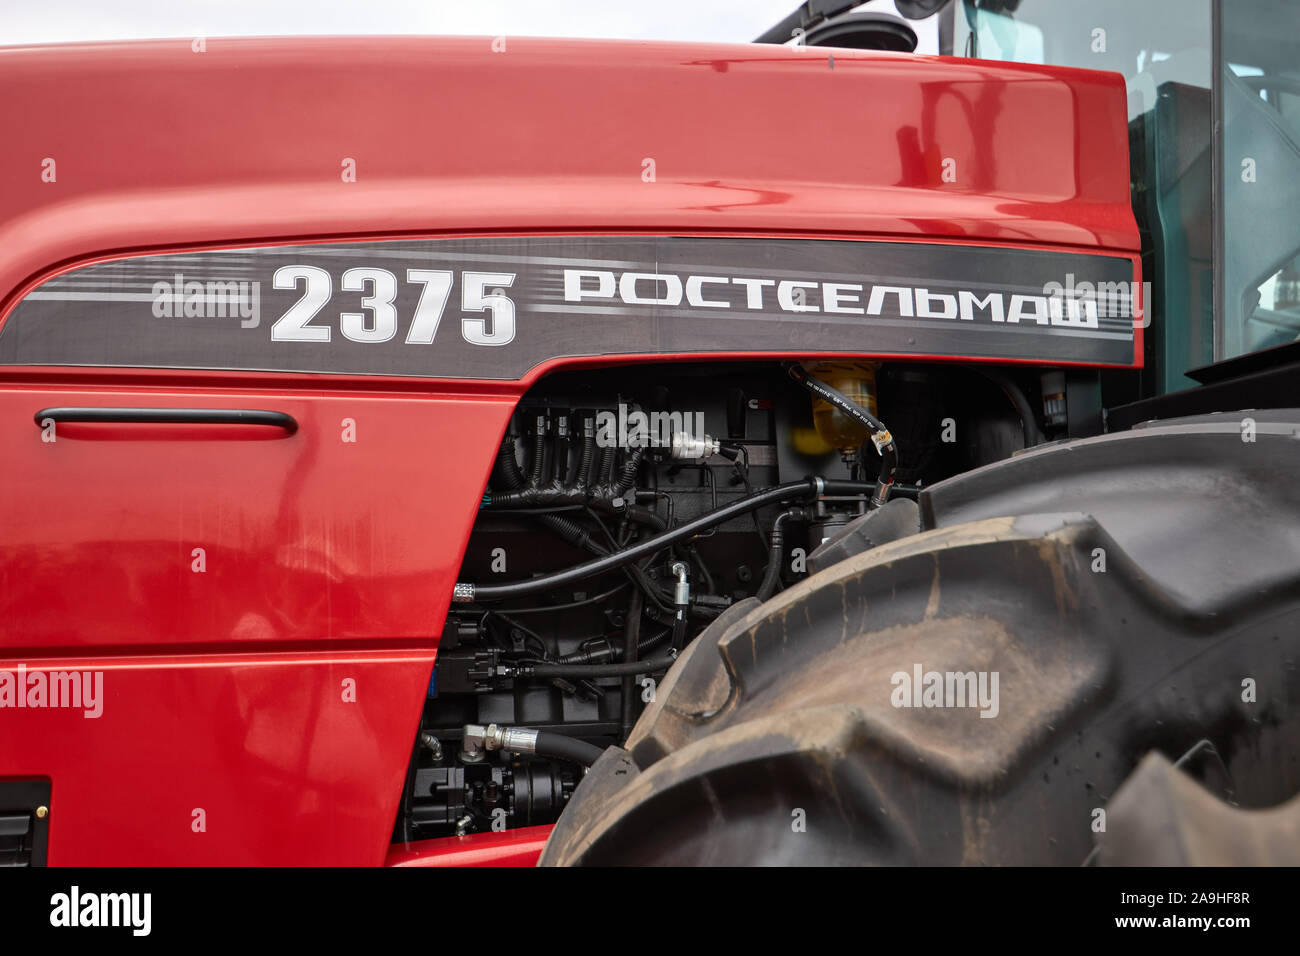 Sambek, Rostov Region, Russia, June 28, 2019: View of the engine compartment and the huge wheel of the modern Rostselmash RSM-2375 tractor Stock Photo